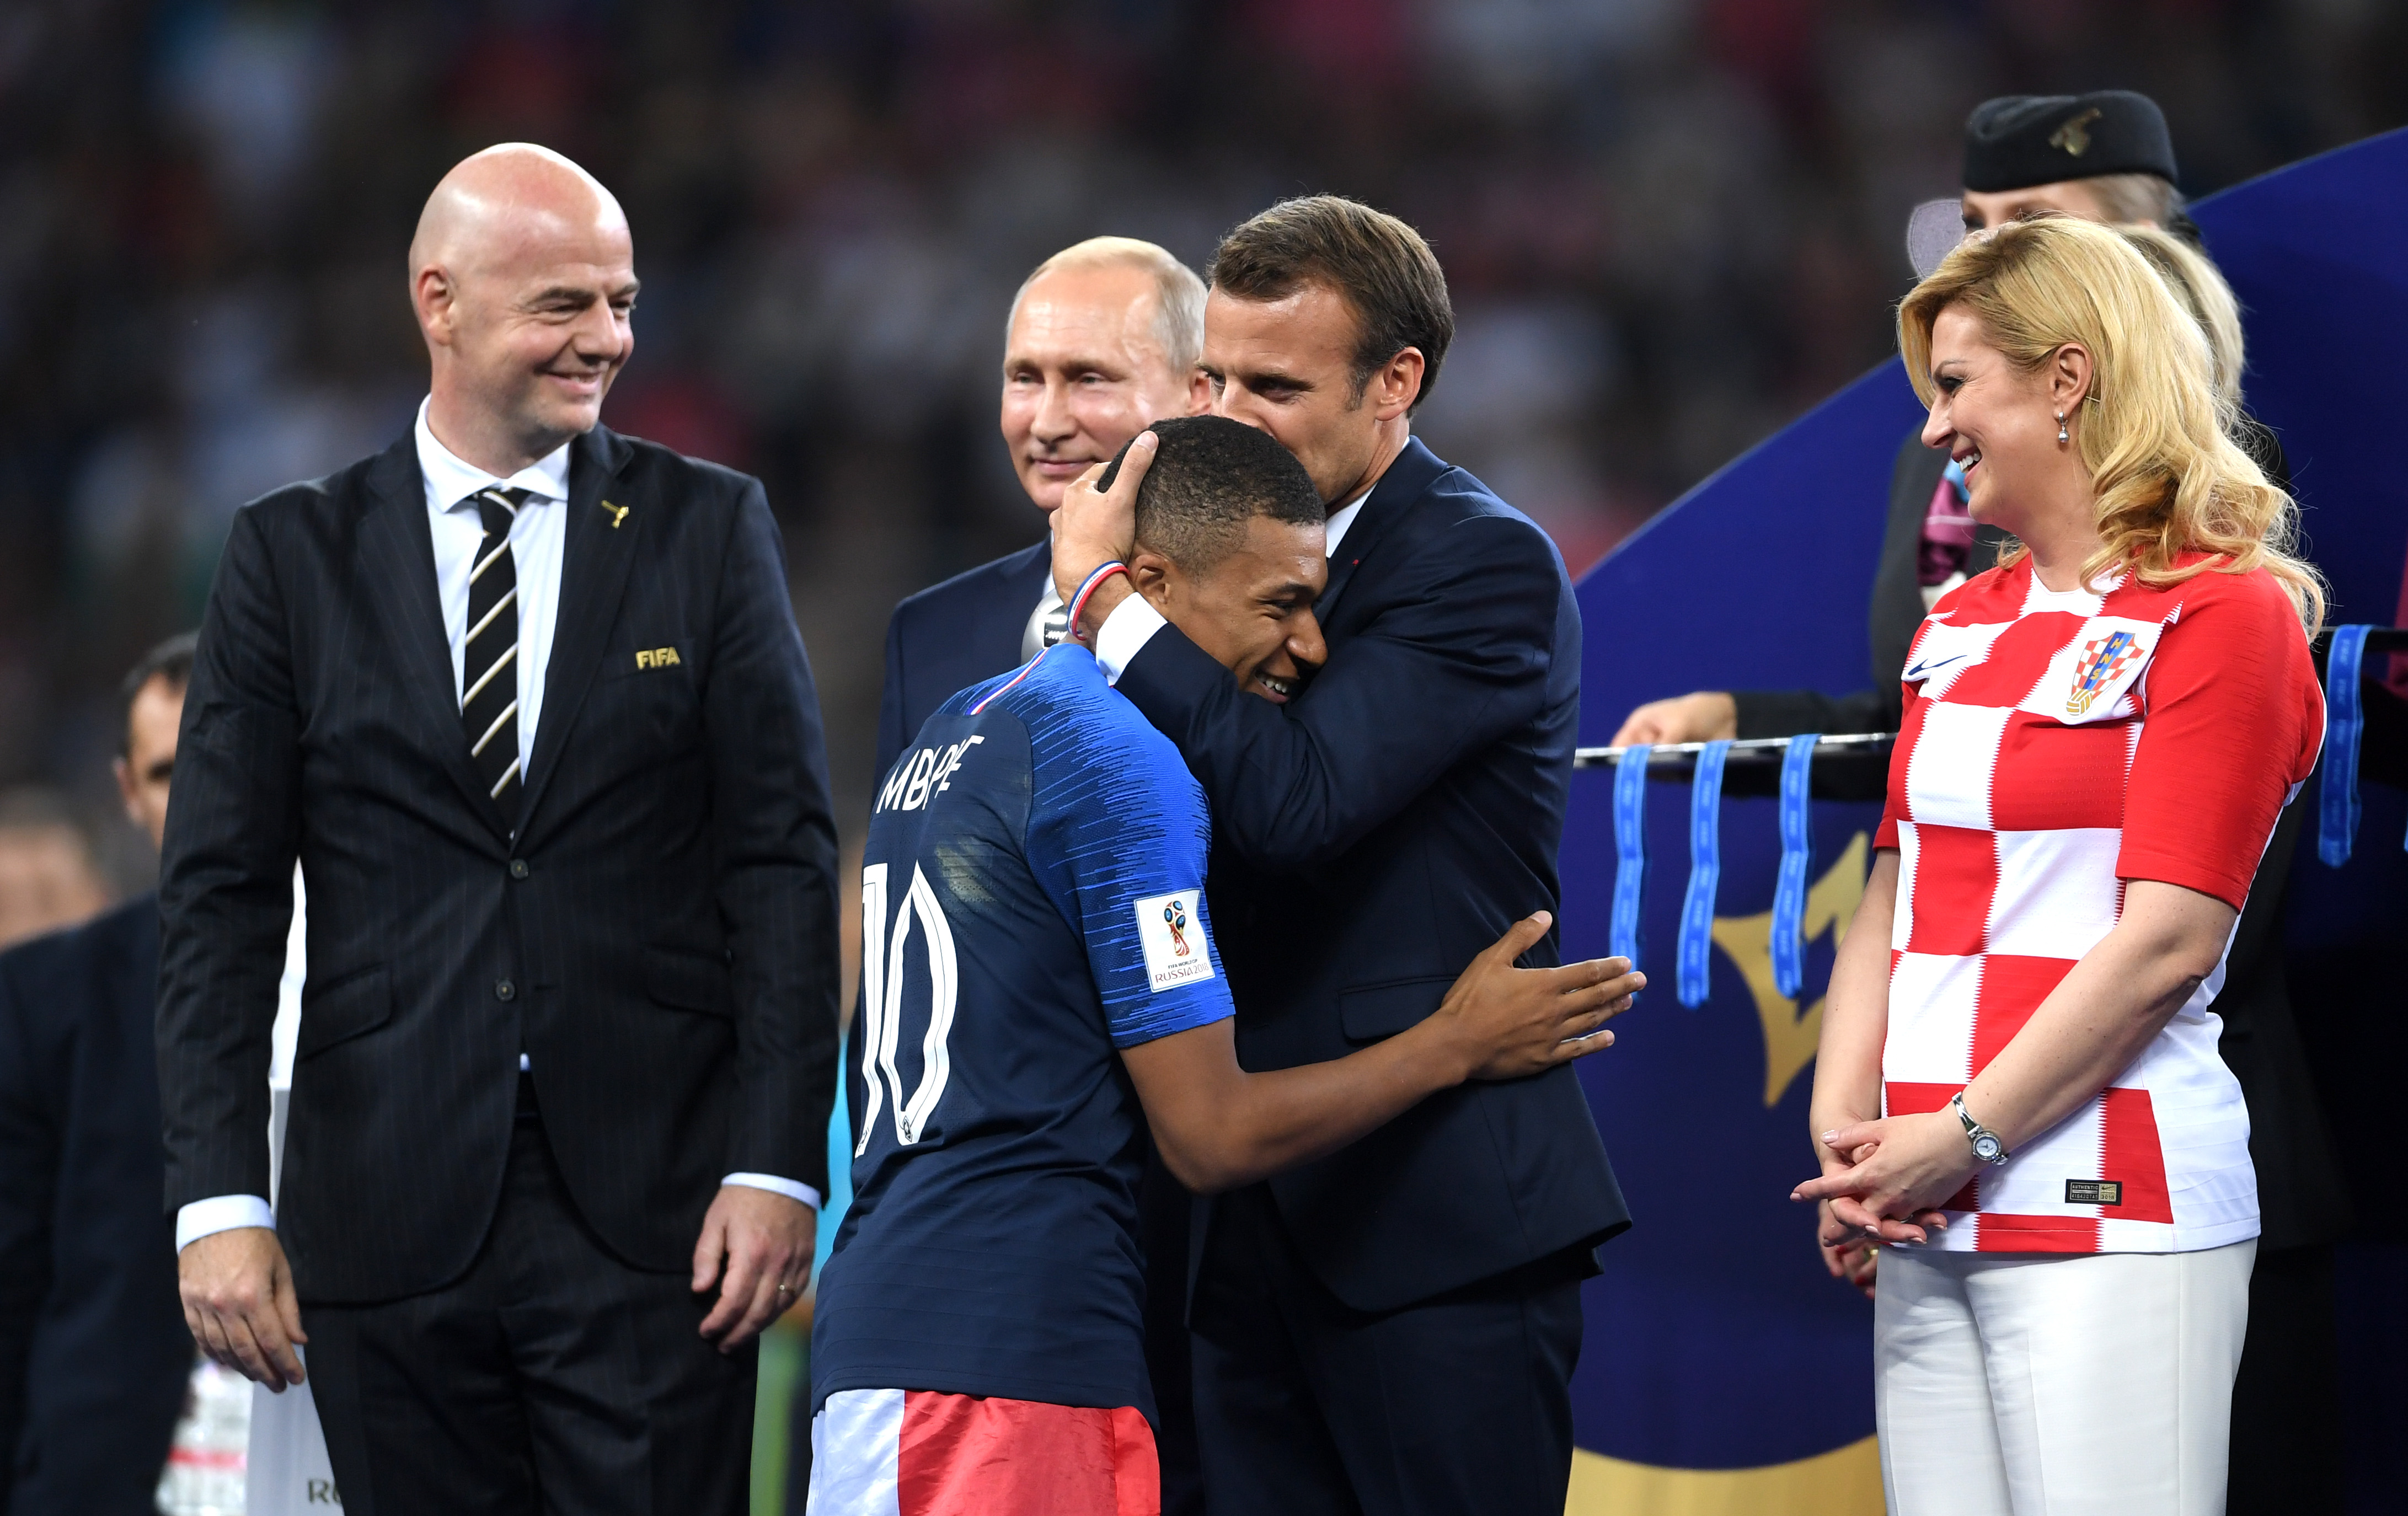 French President Emmanuel Macron awards Kylian Mbappe of France with the FIFA Young Player Award as President of Russia Vladimir Putin and President of Croatia, Kolinda Grabar Kitarovic look on following the 2018 FIFA World Cup Final between France and Croatia at Luzhniki Stadium on July 15, 2018 in Moscow, Russia. (Photo by Laurence Griffiths/Getty Images) (Laurence Griffiths—Getty Images)